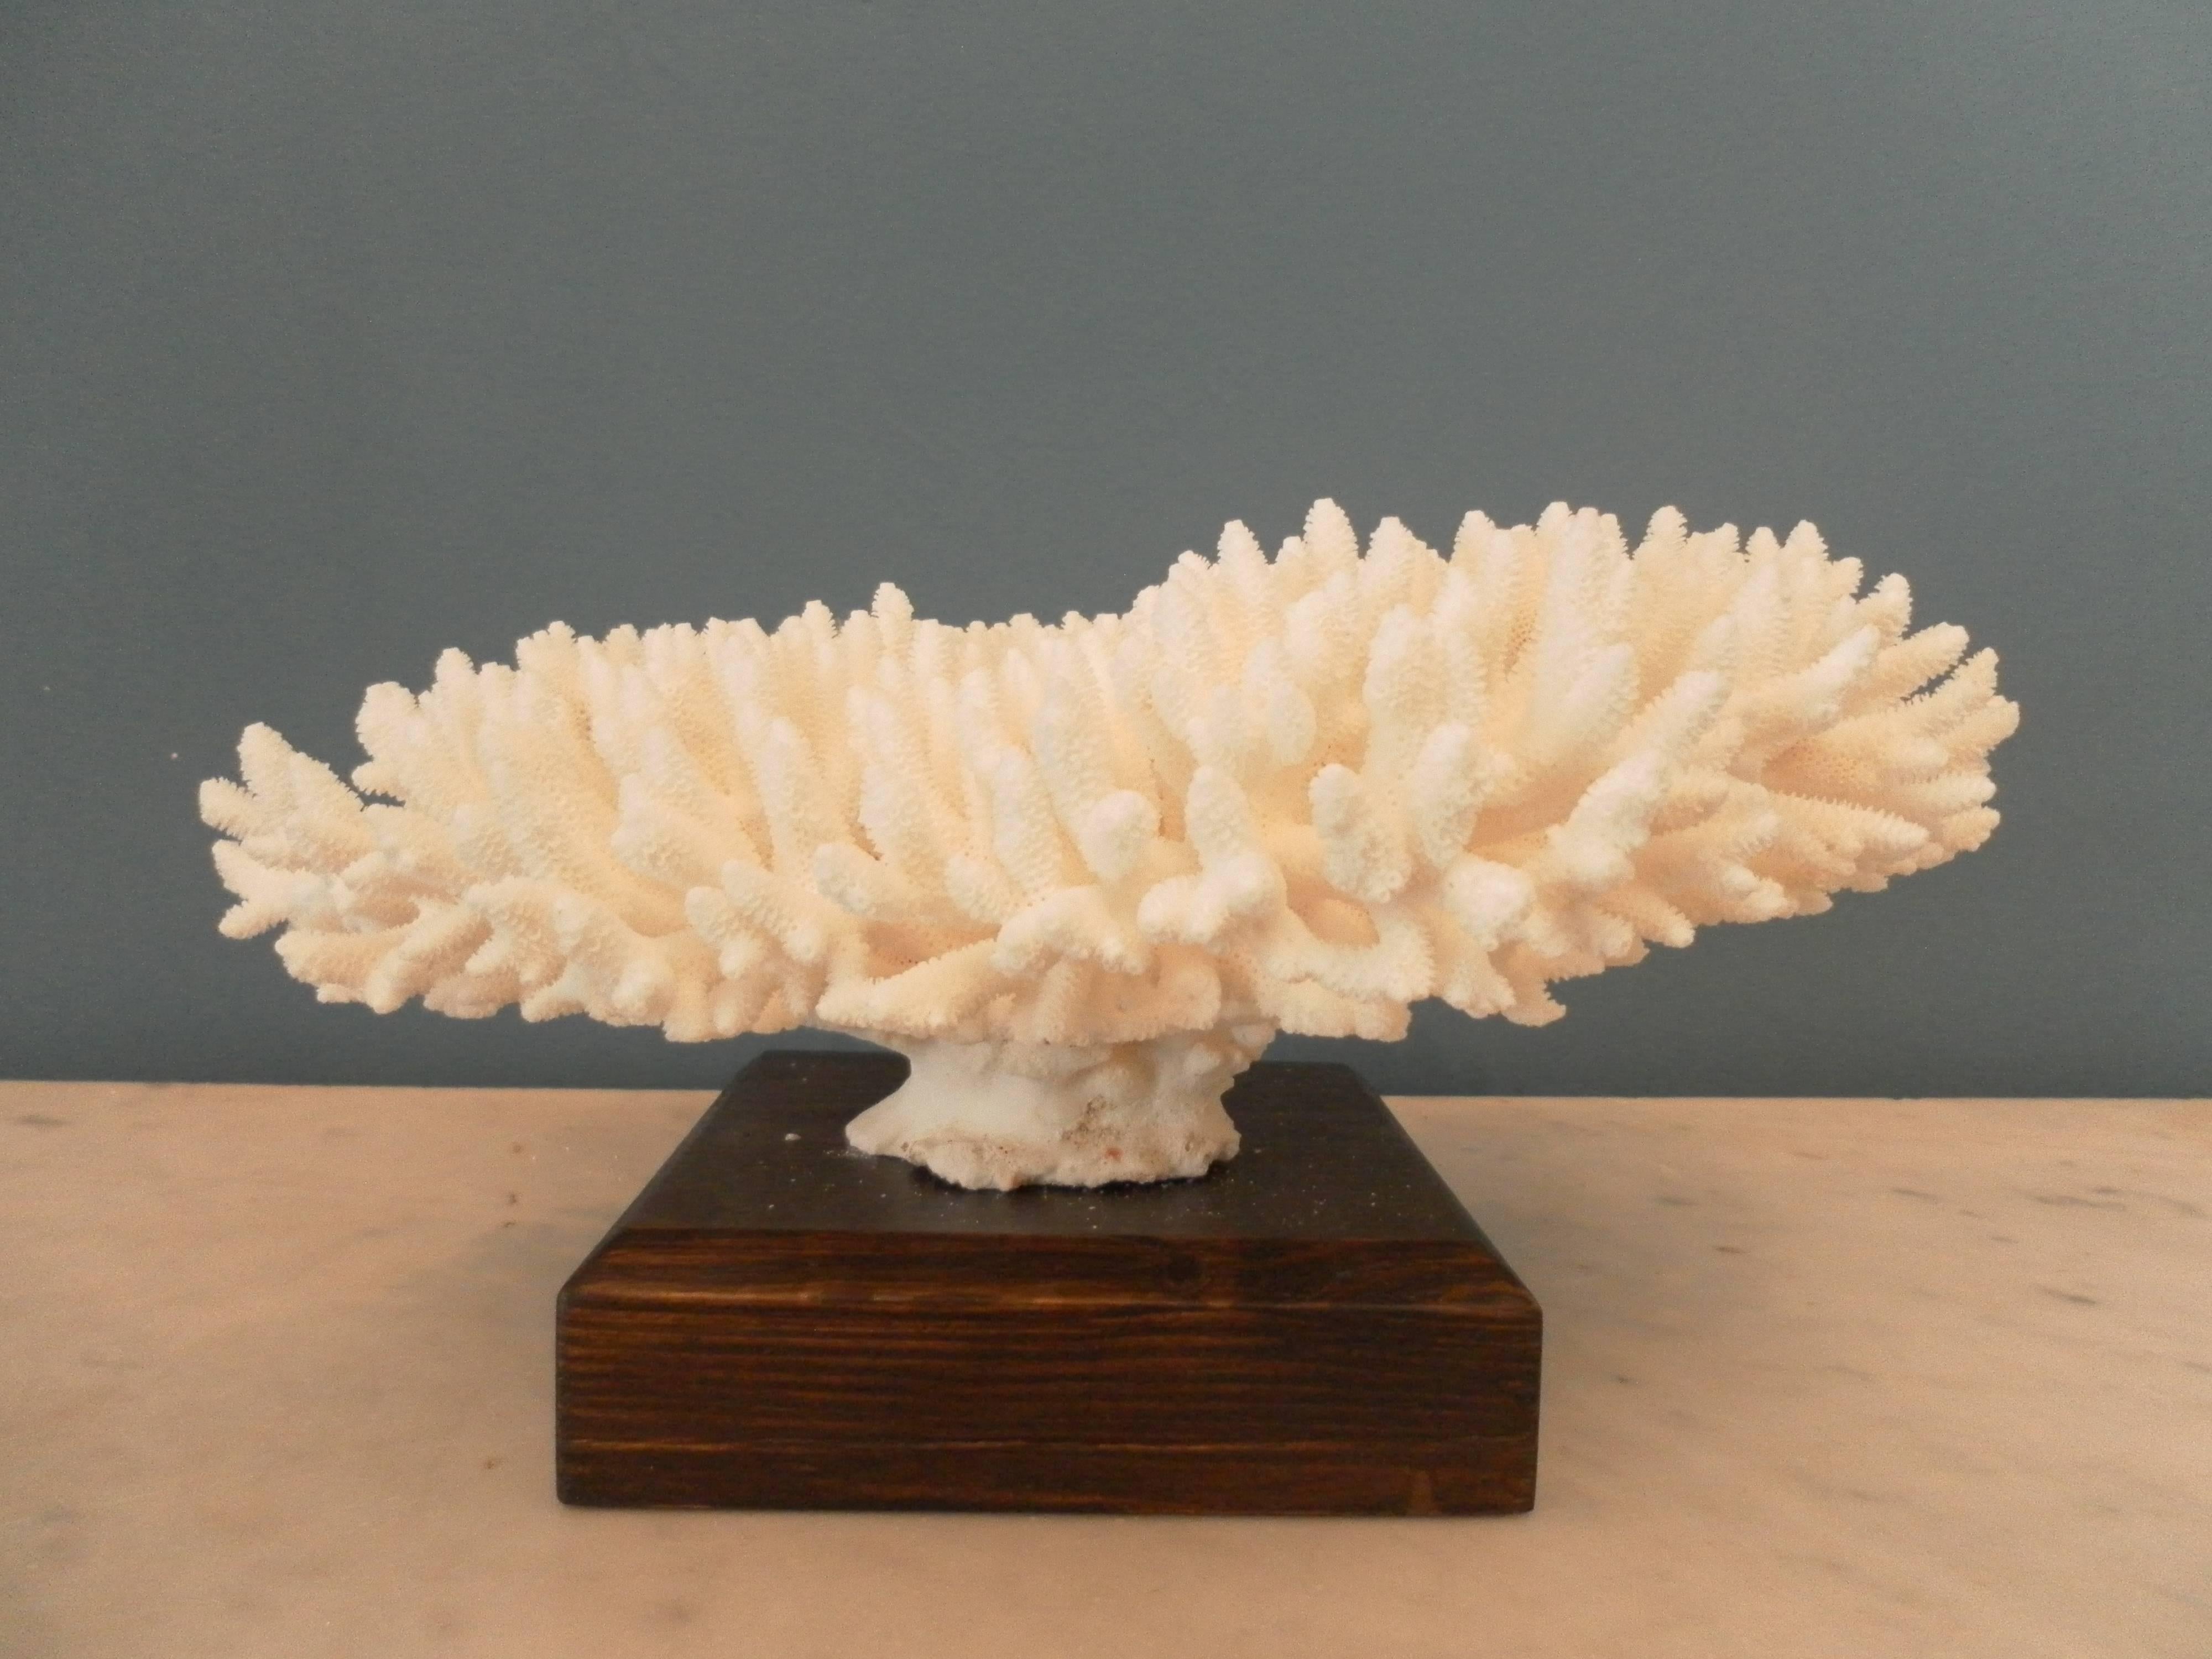 A white coral specimen with wood base. Cites included. A Wunderkammer object 20th century.